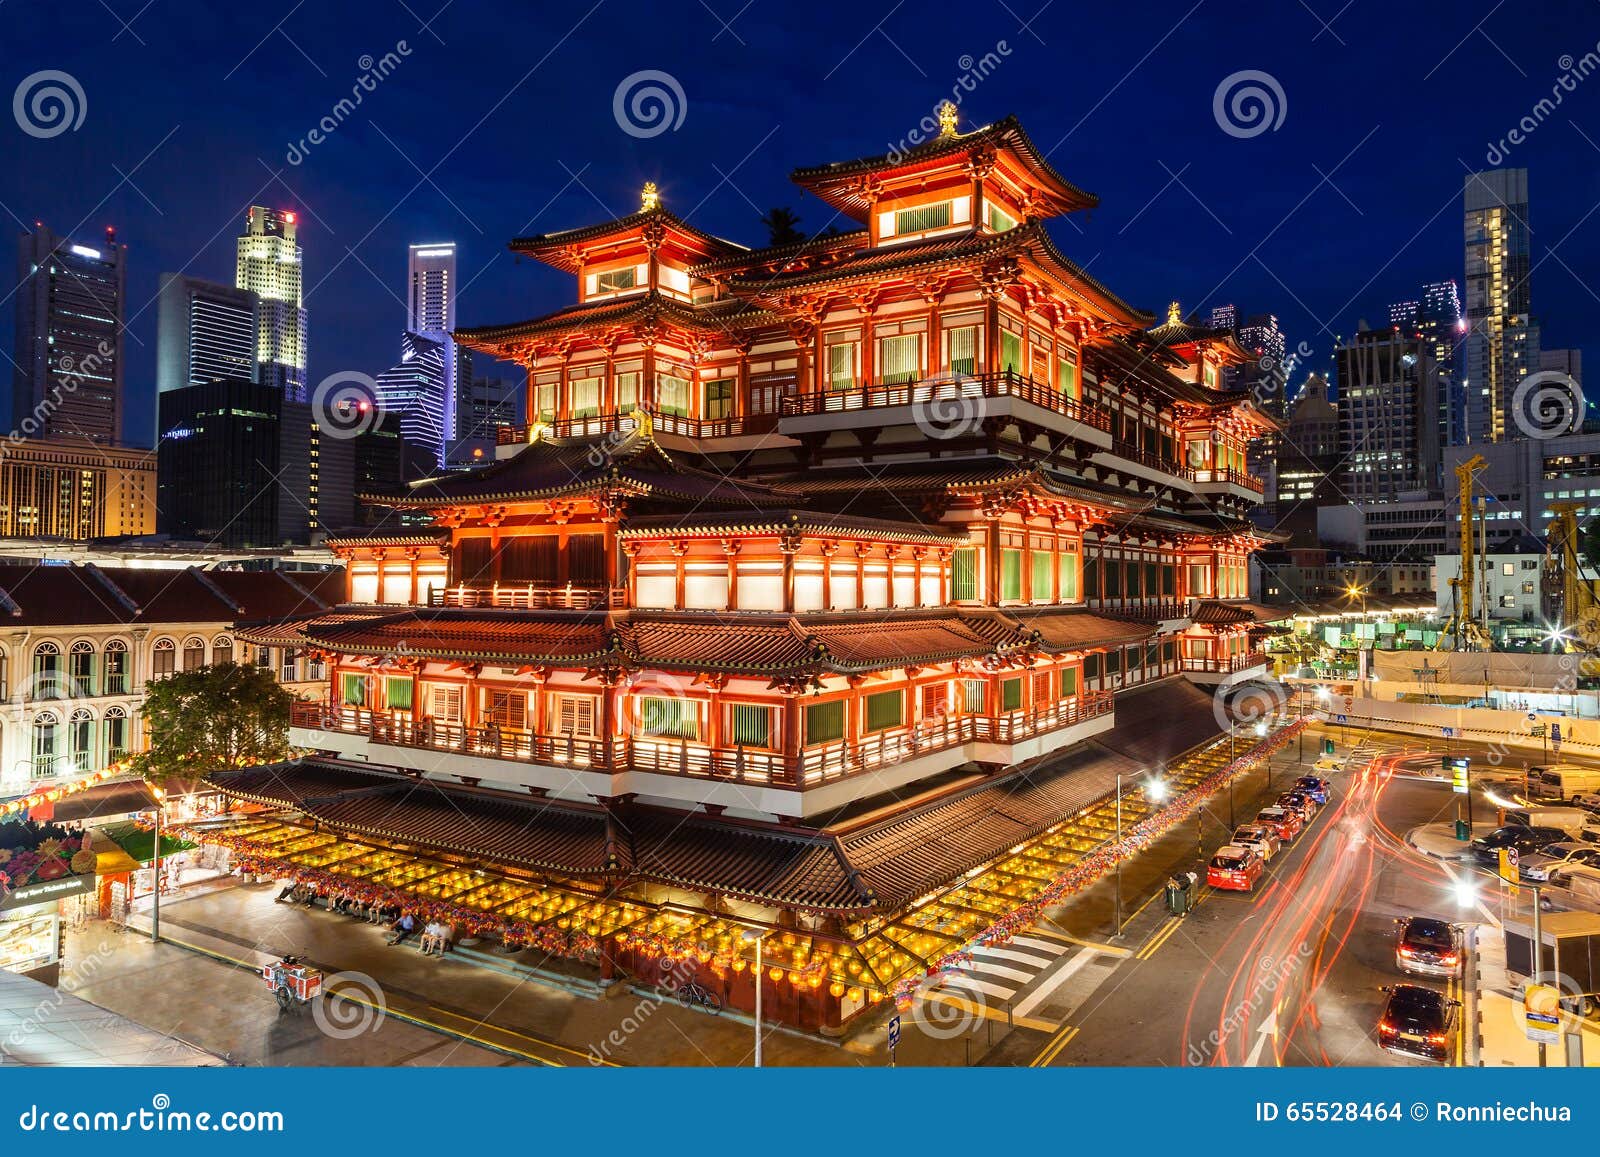 night view of a chinese temple in singapore chinatown